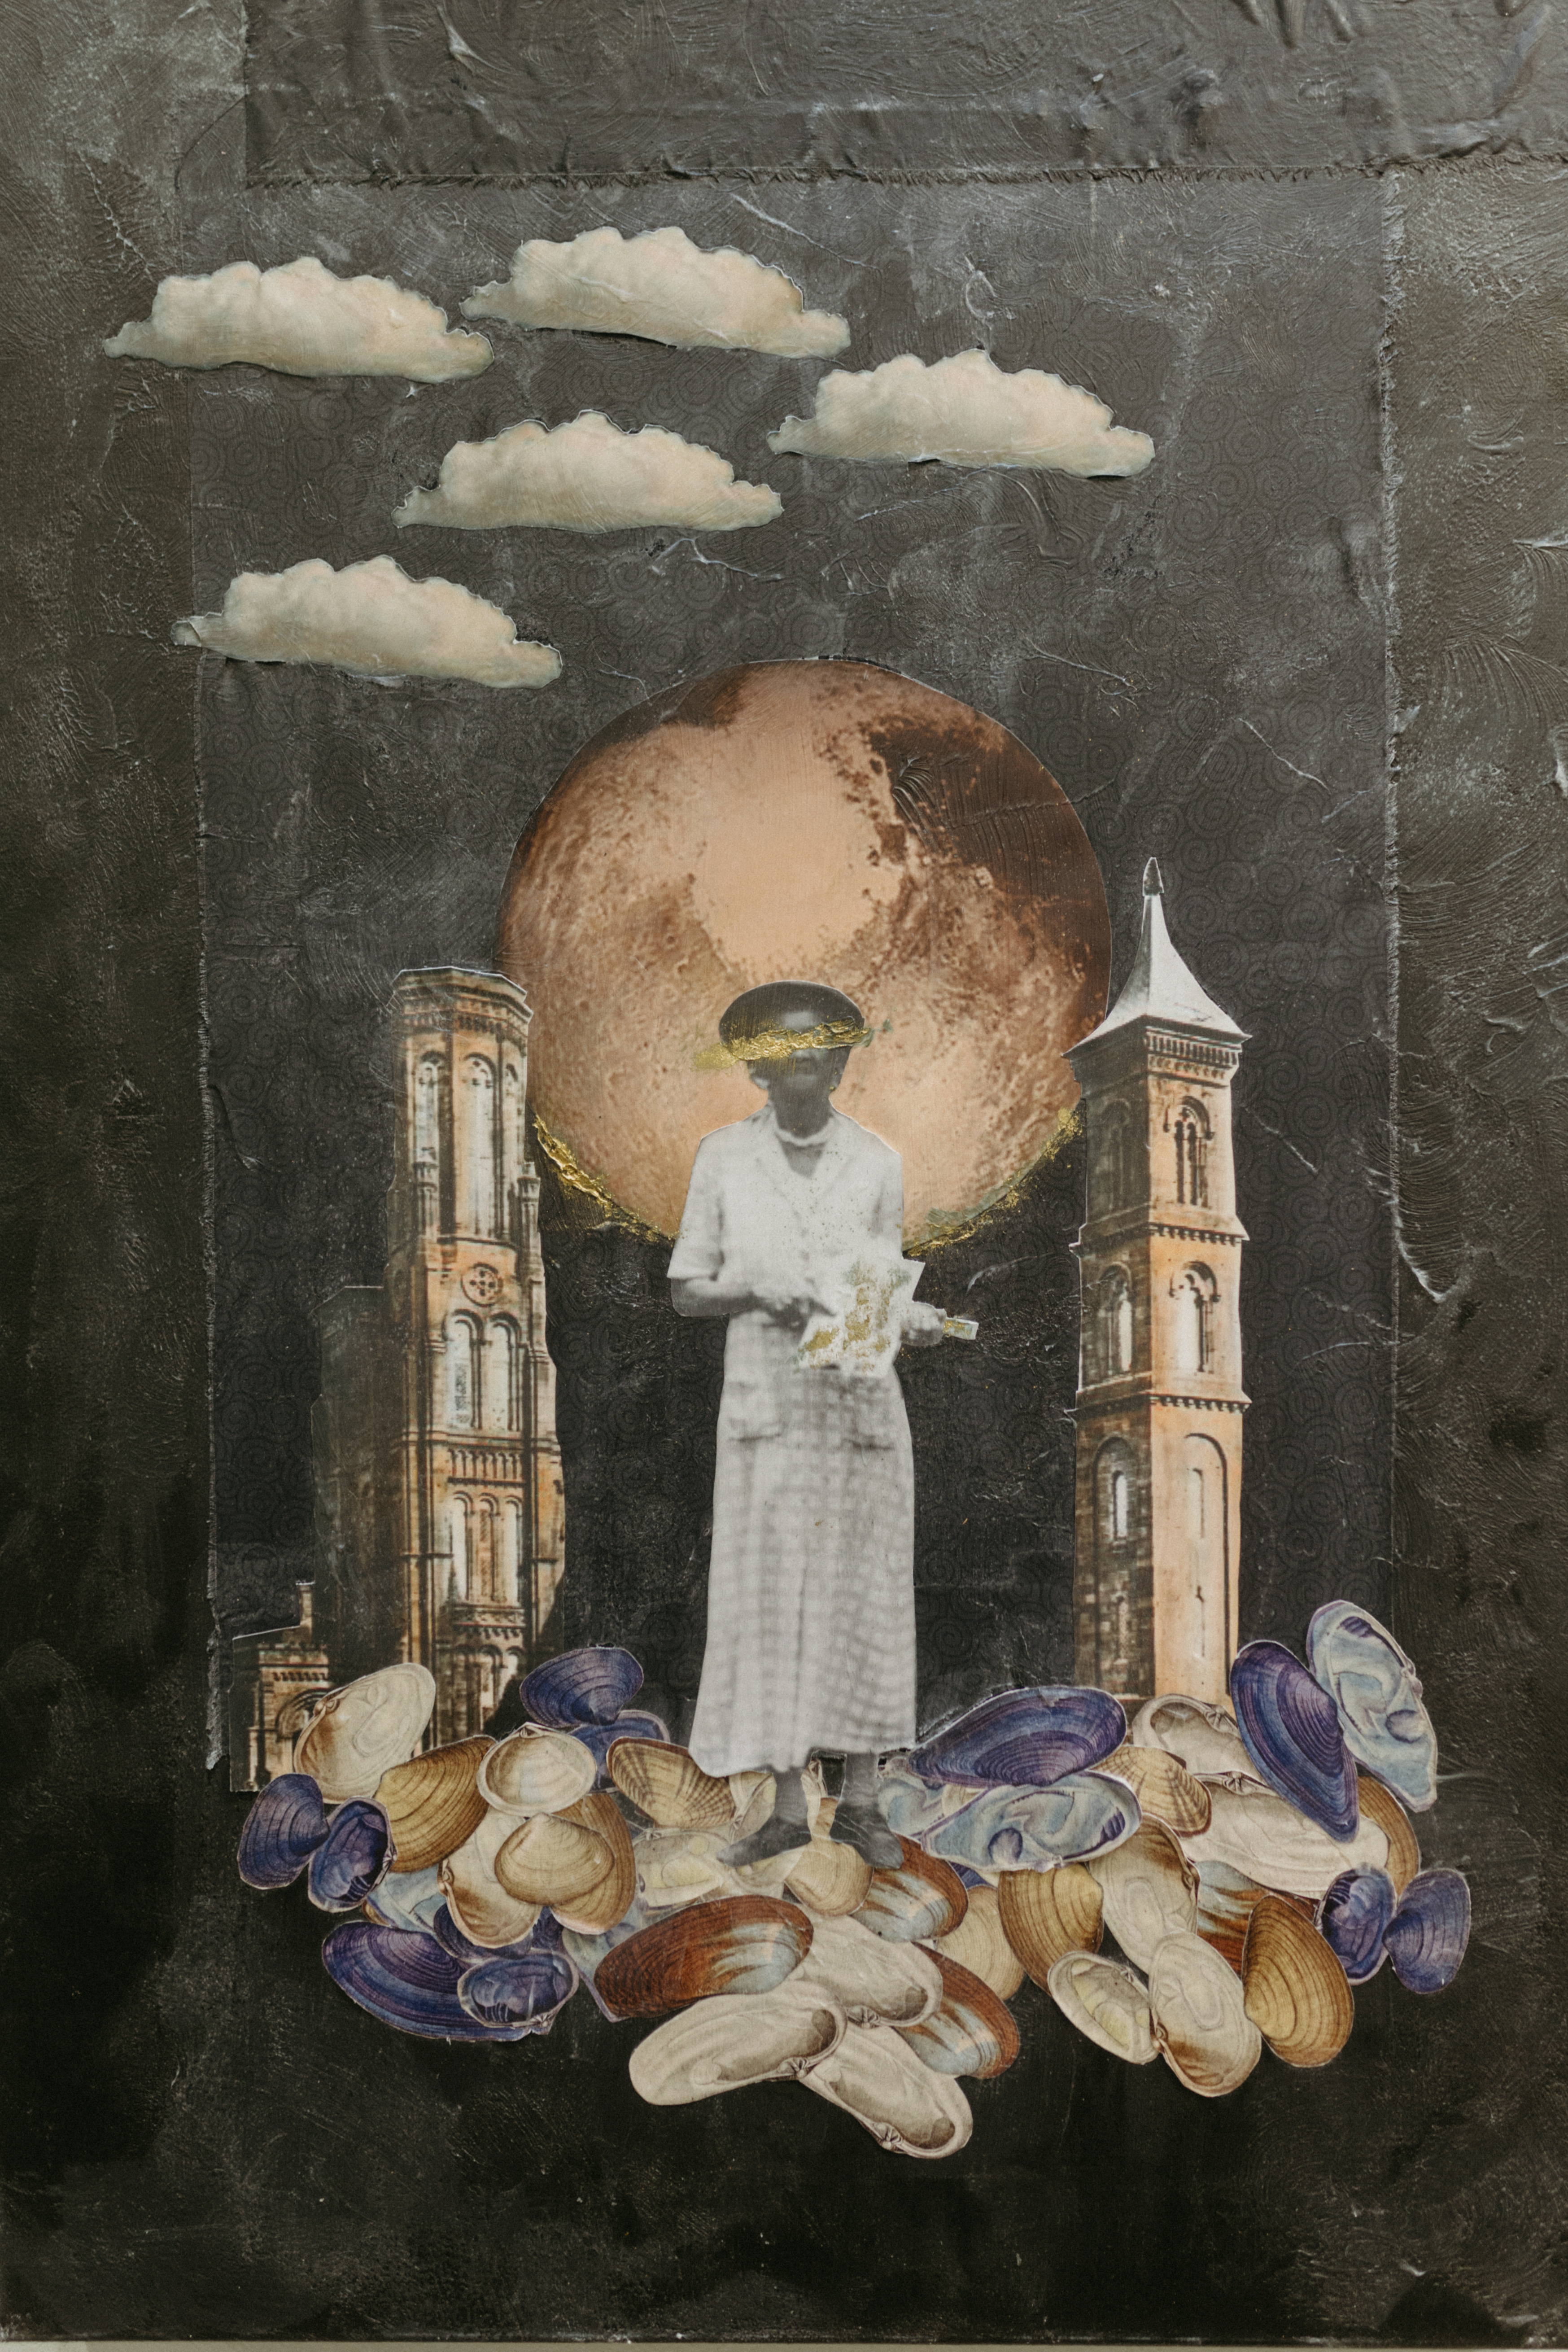 Close up image of a collage work on Anthony's studio wall. It depicts a woman standing on seashells. An image of Mars represents the large moon. 